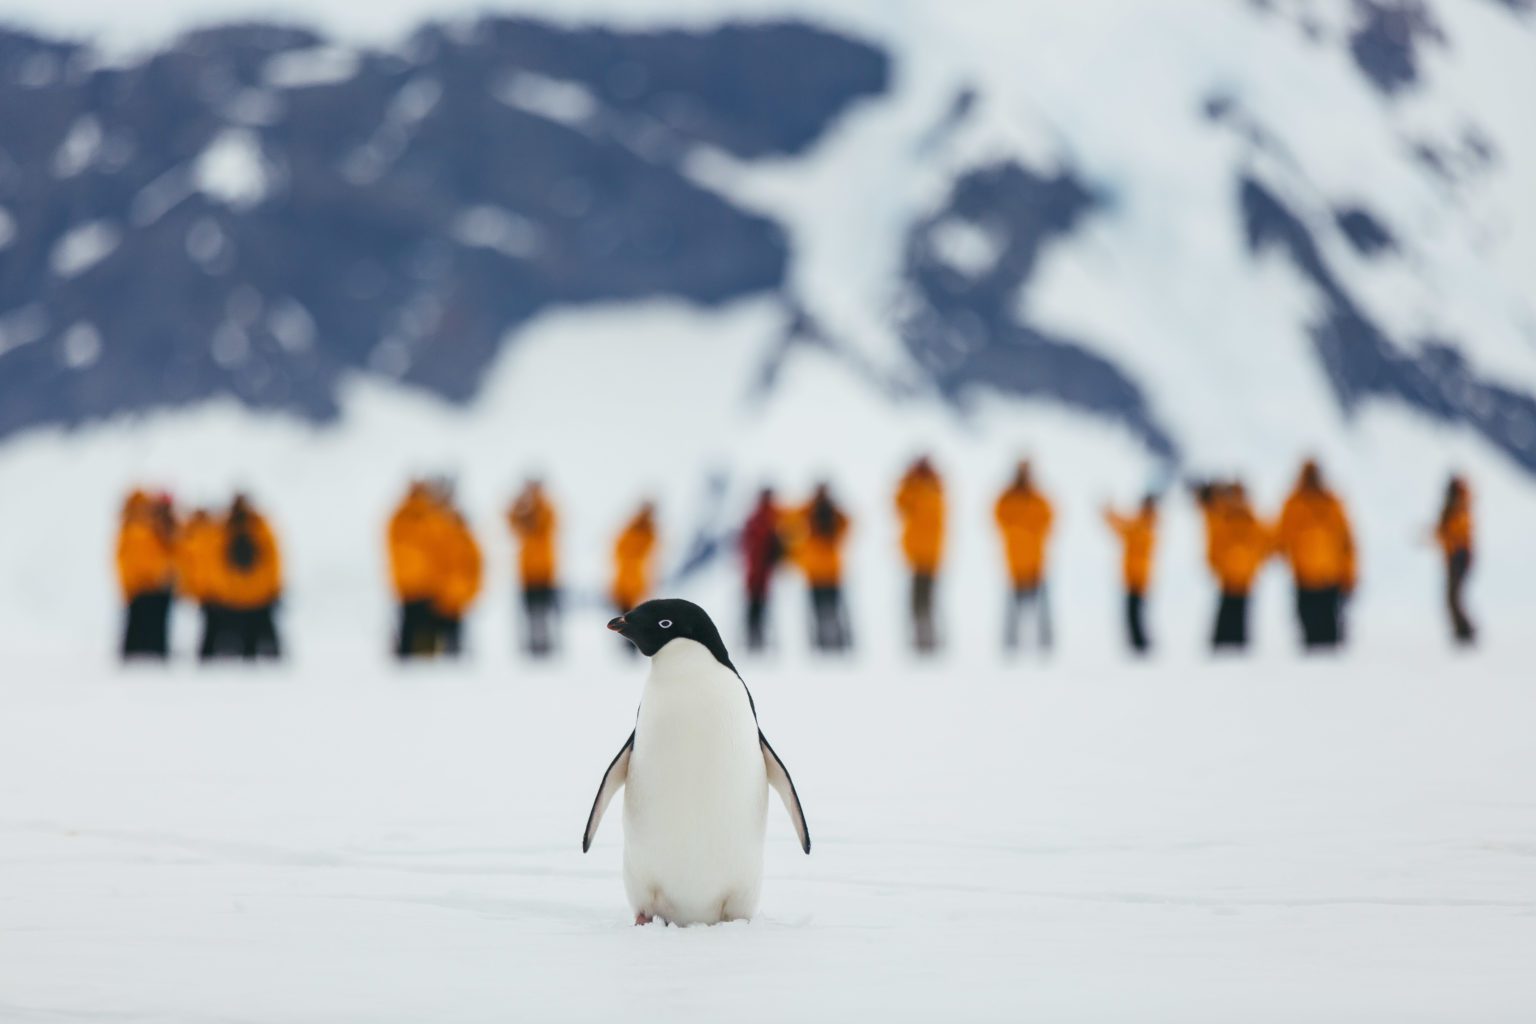 penguin walking on ice toward camera with people in orange coats in the background